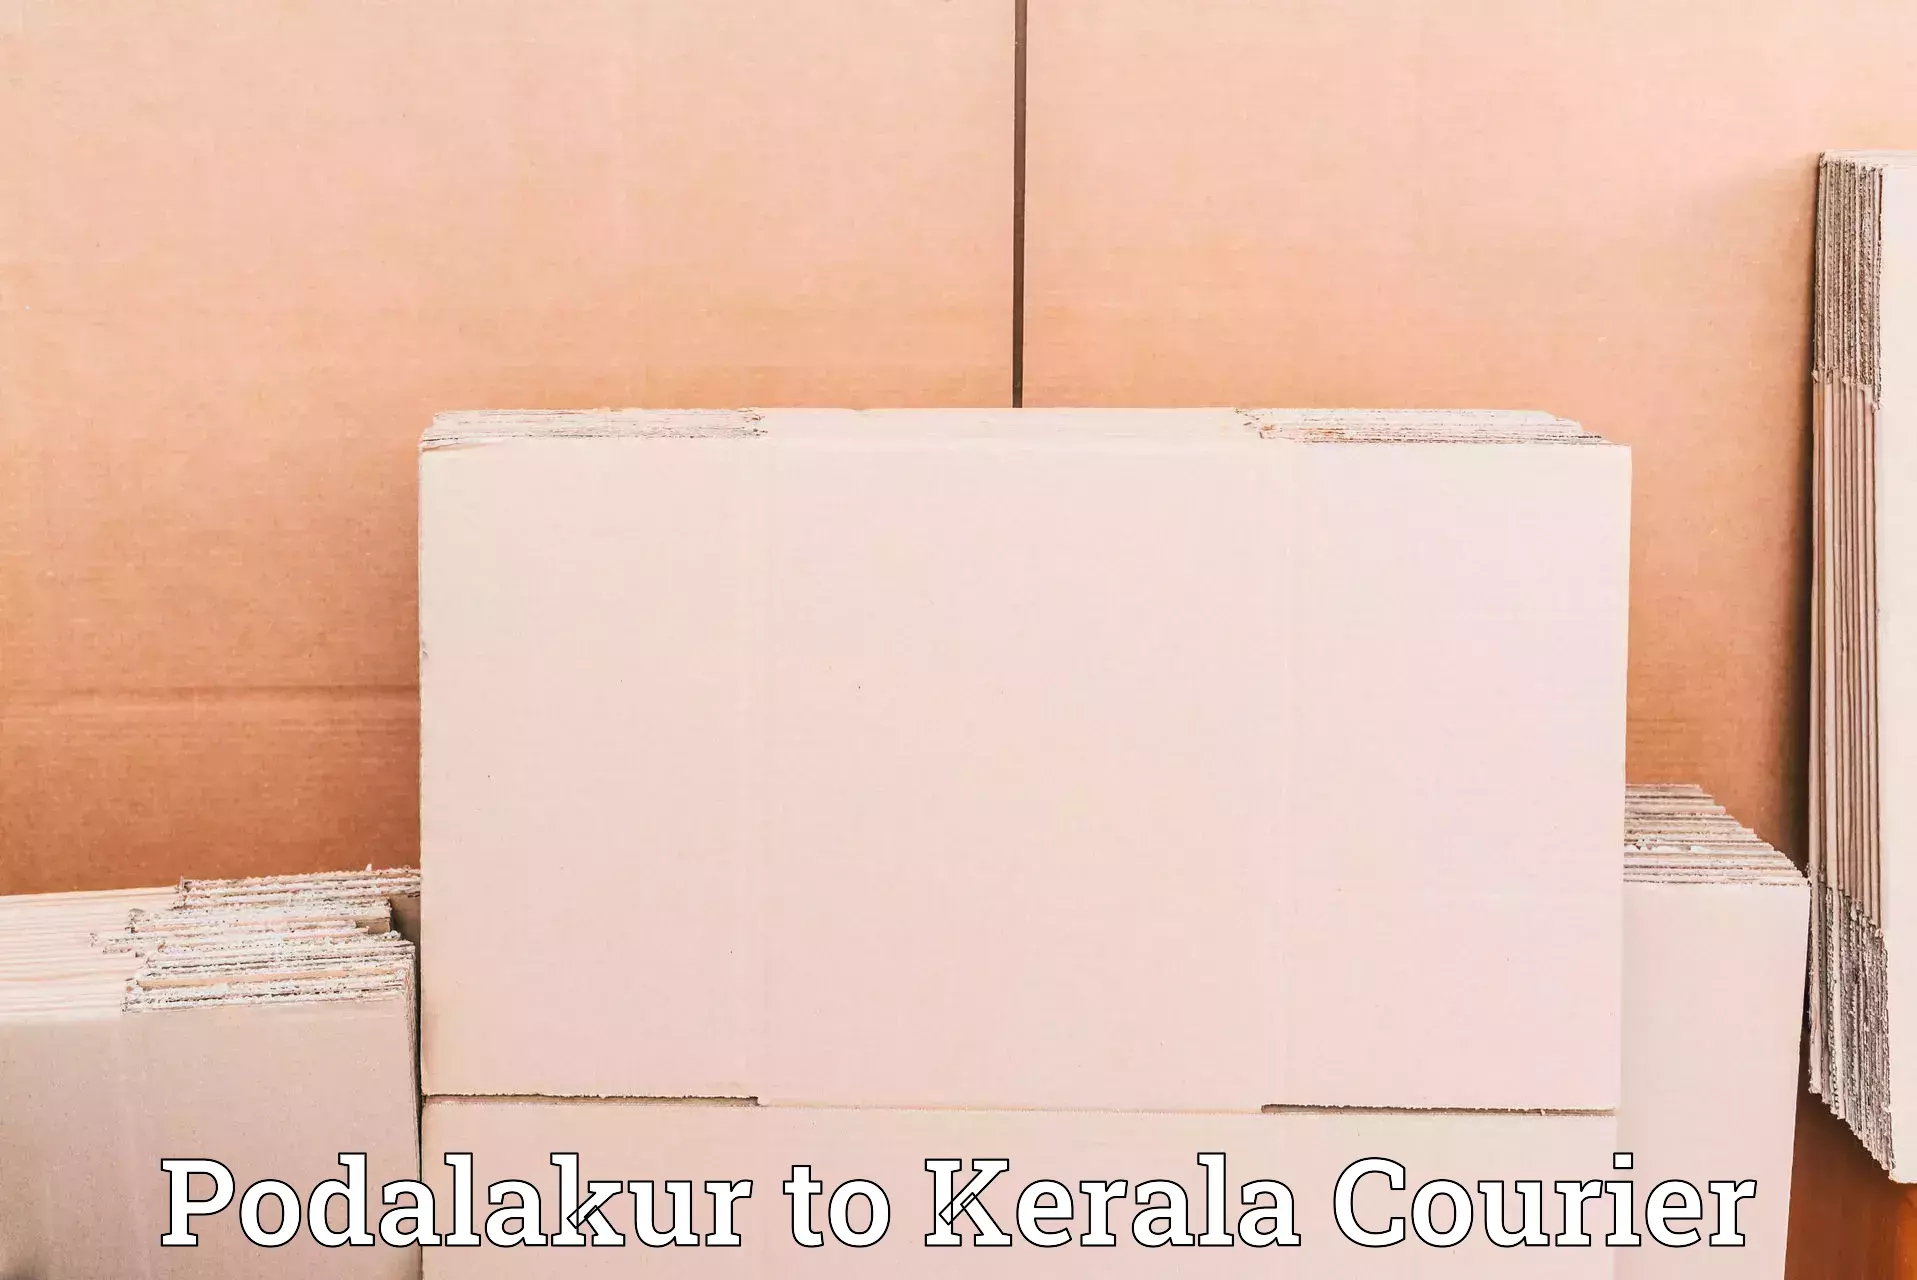 Multi-national courier services Podalakur to Shoranur